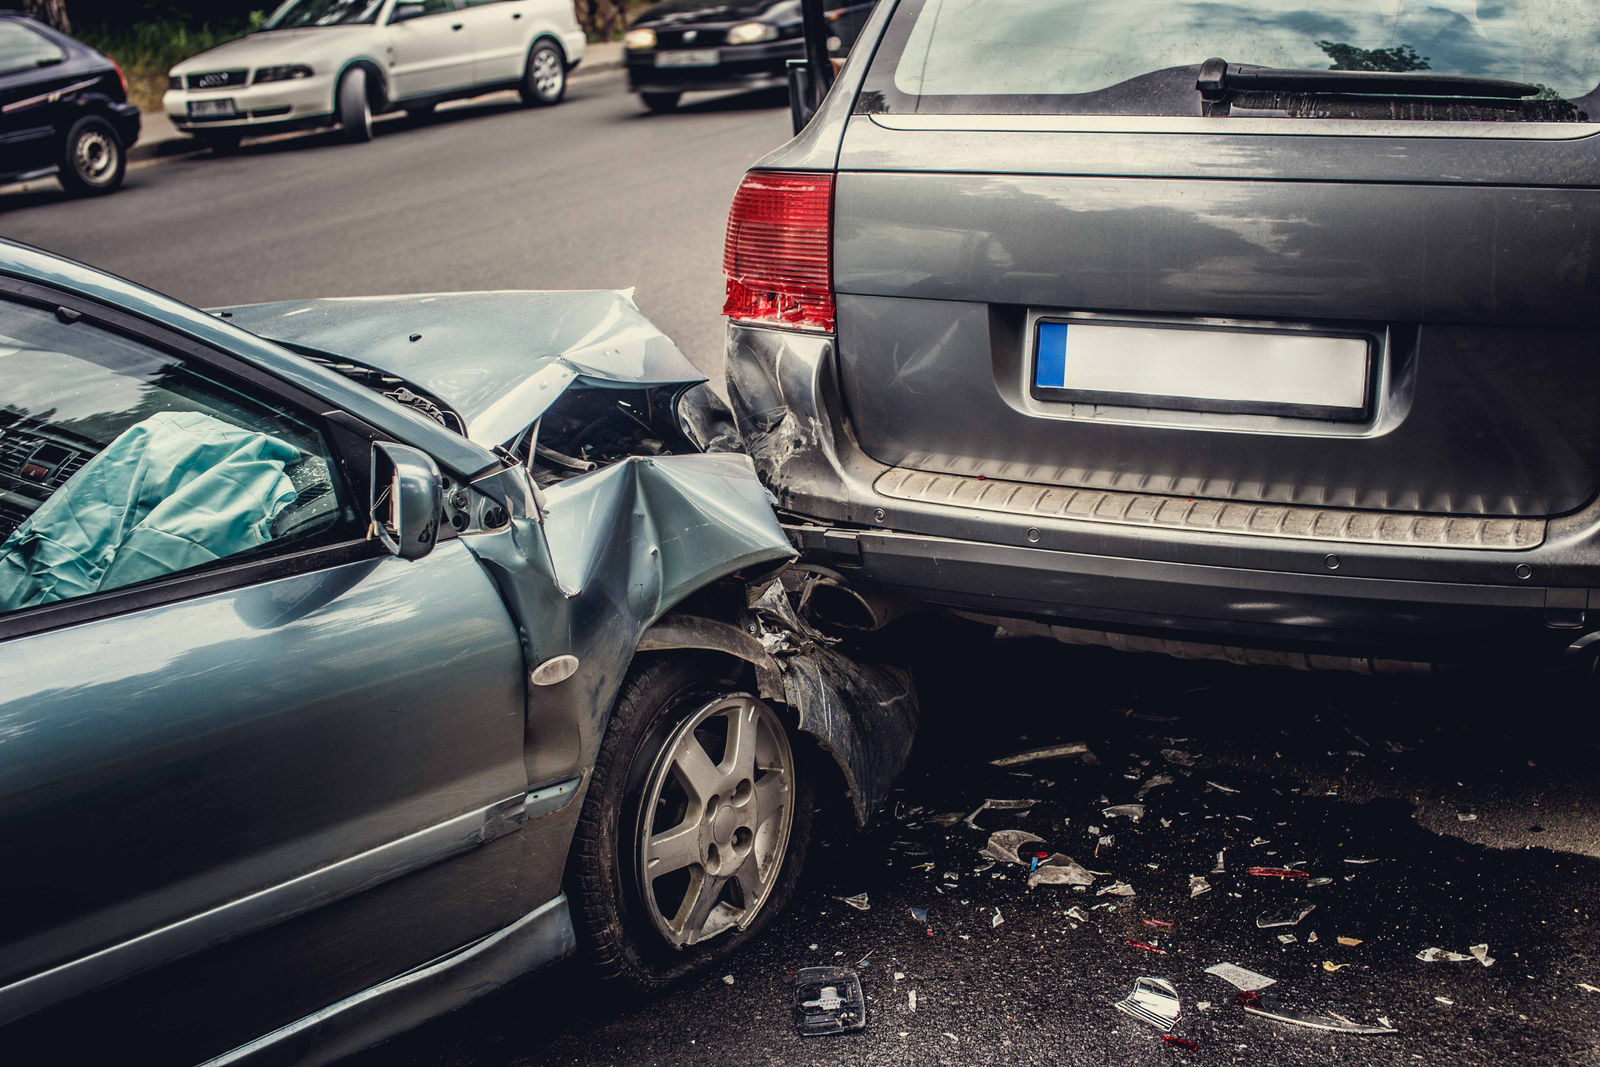 Does hitting a parked car affect my insurance?